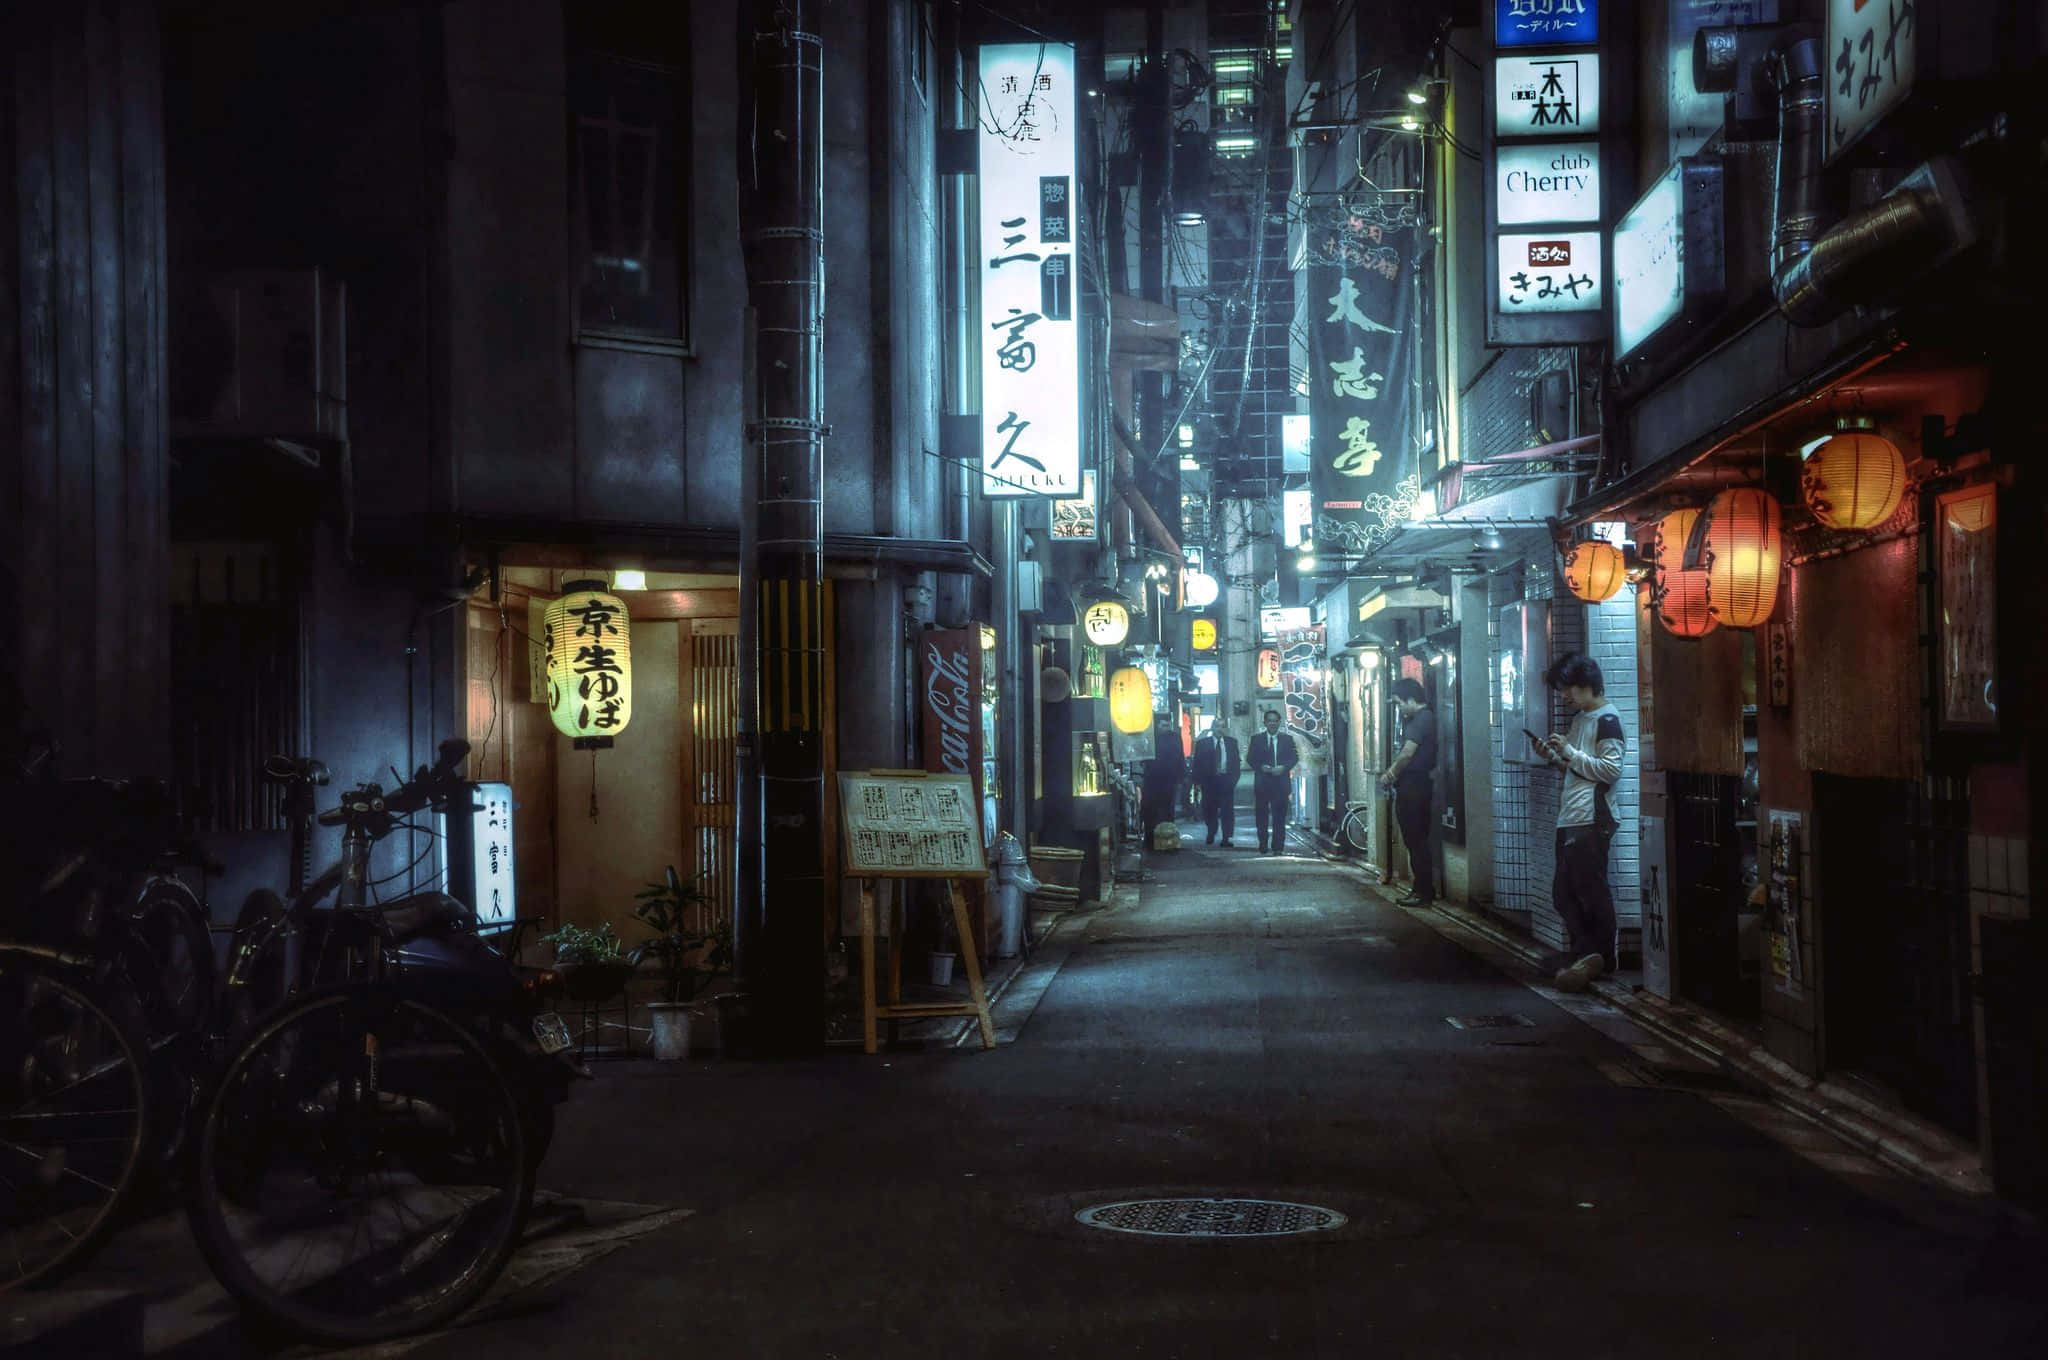 Passing by a peaceful alleyway